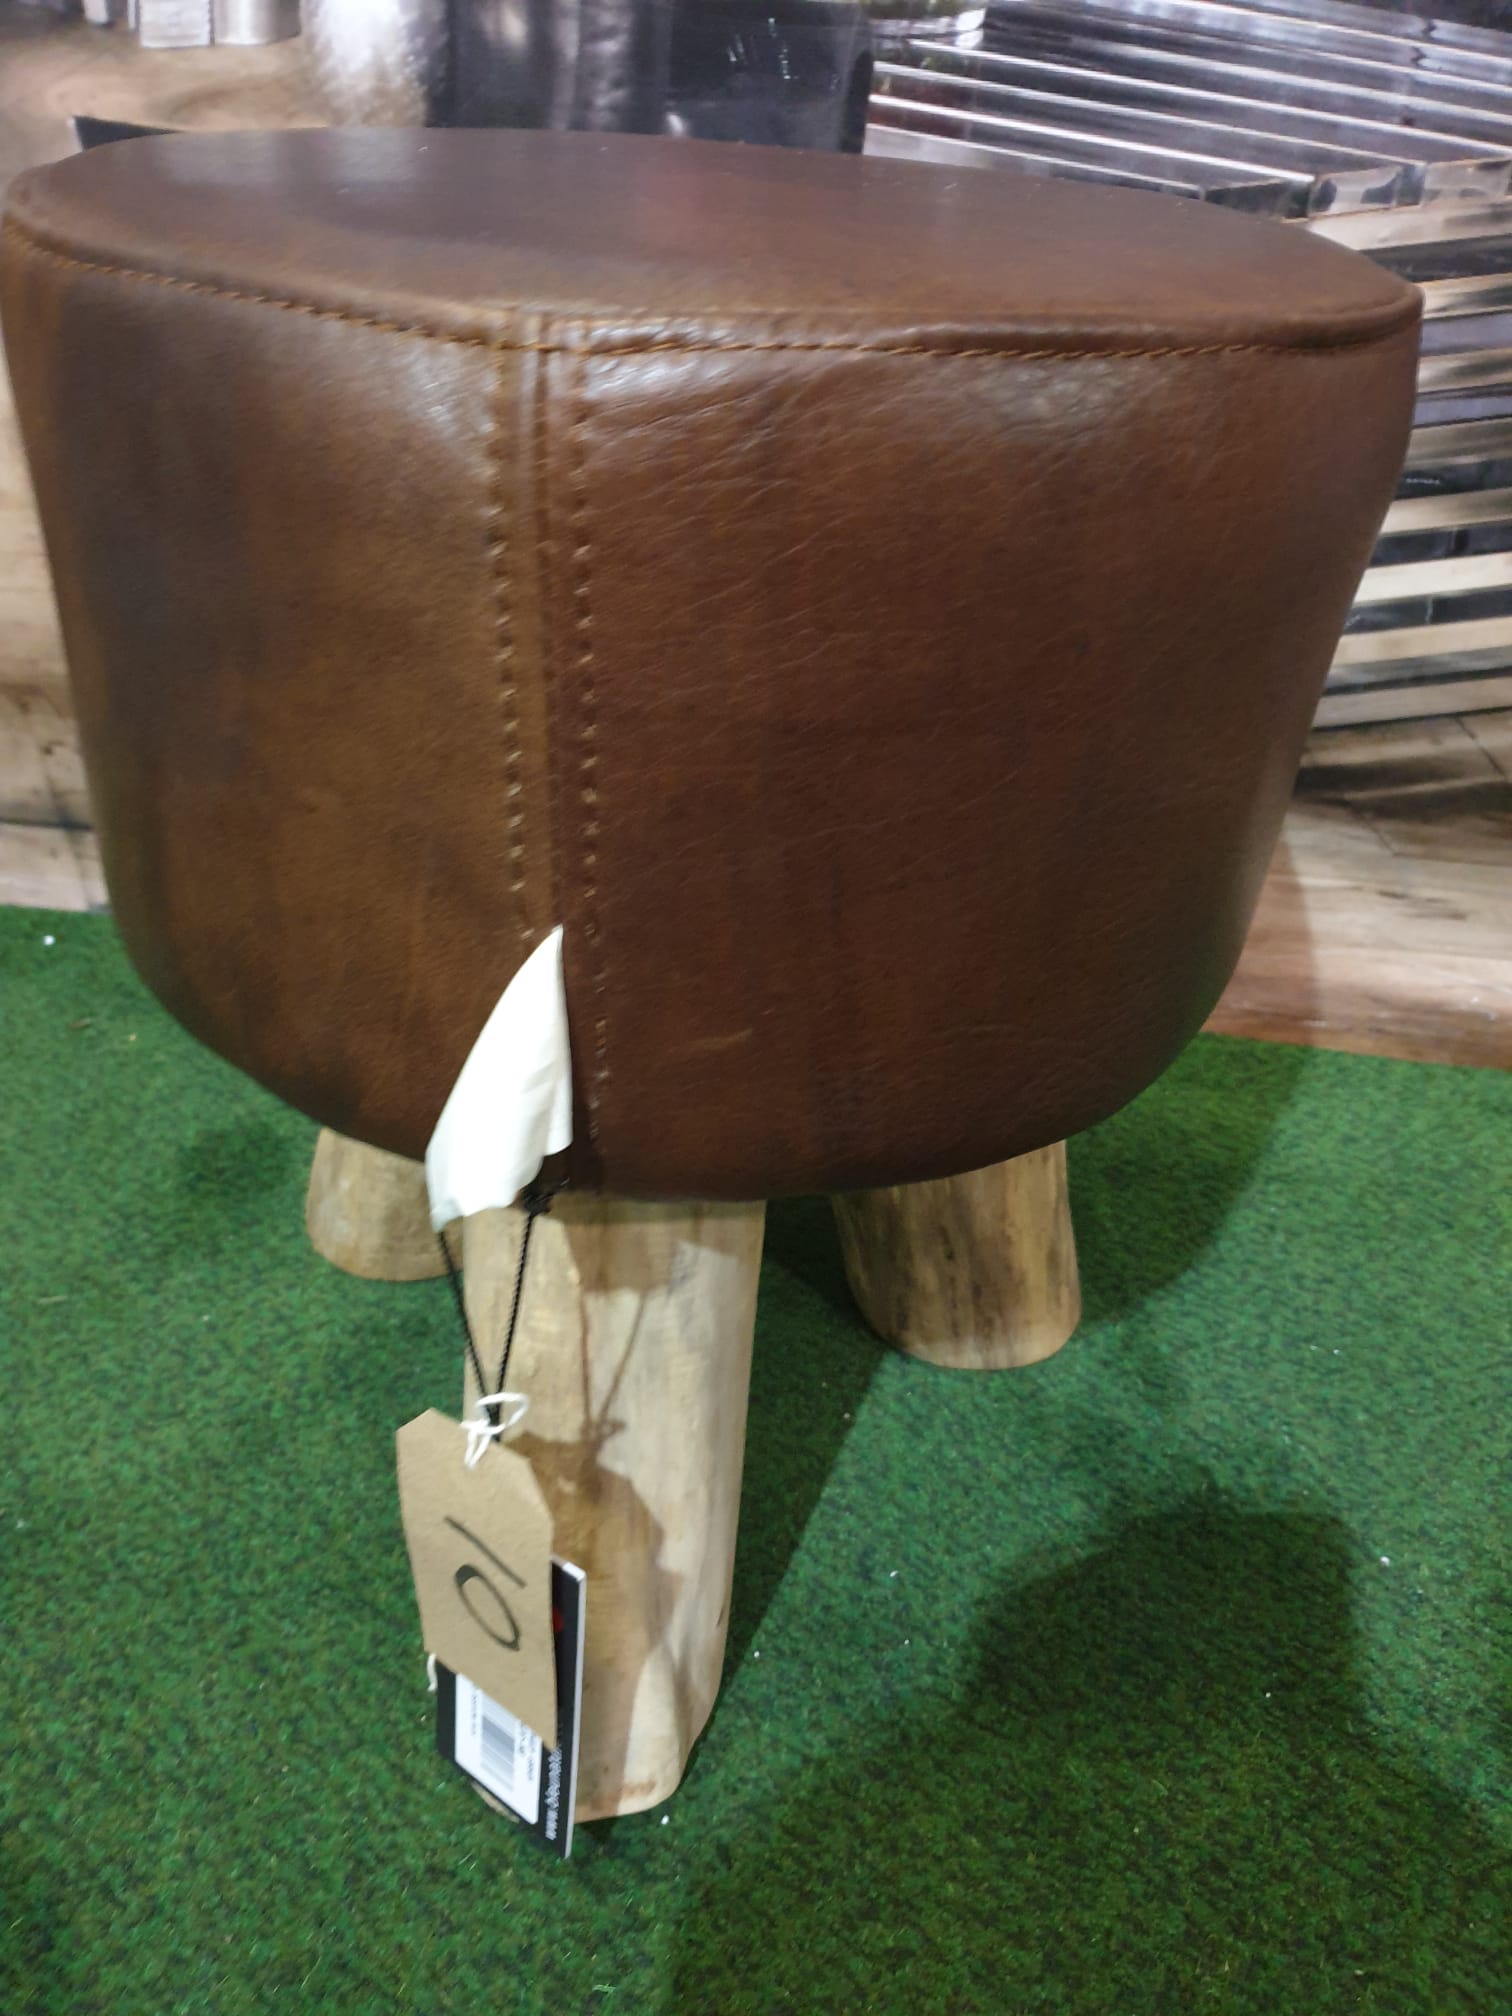 Bleu Nature F016 Mousse Driftwood and leather stool finished in Matador Nuez hide leather 380 x - Image 2 of 3